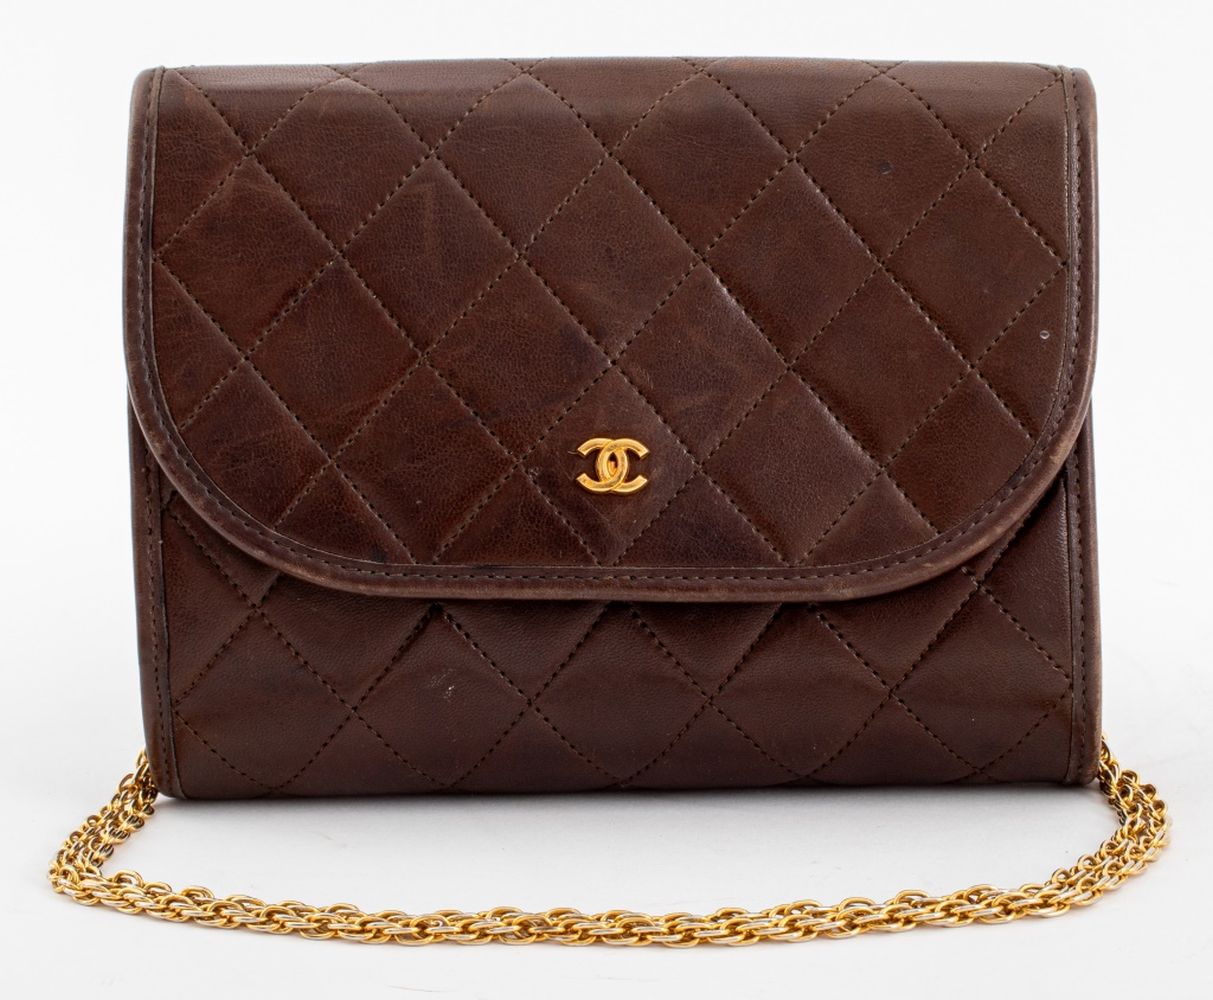 CHANEL QUILTED BROWN LEATHER FRONT